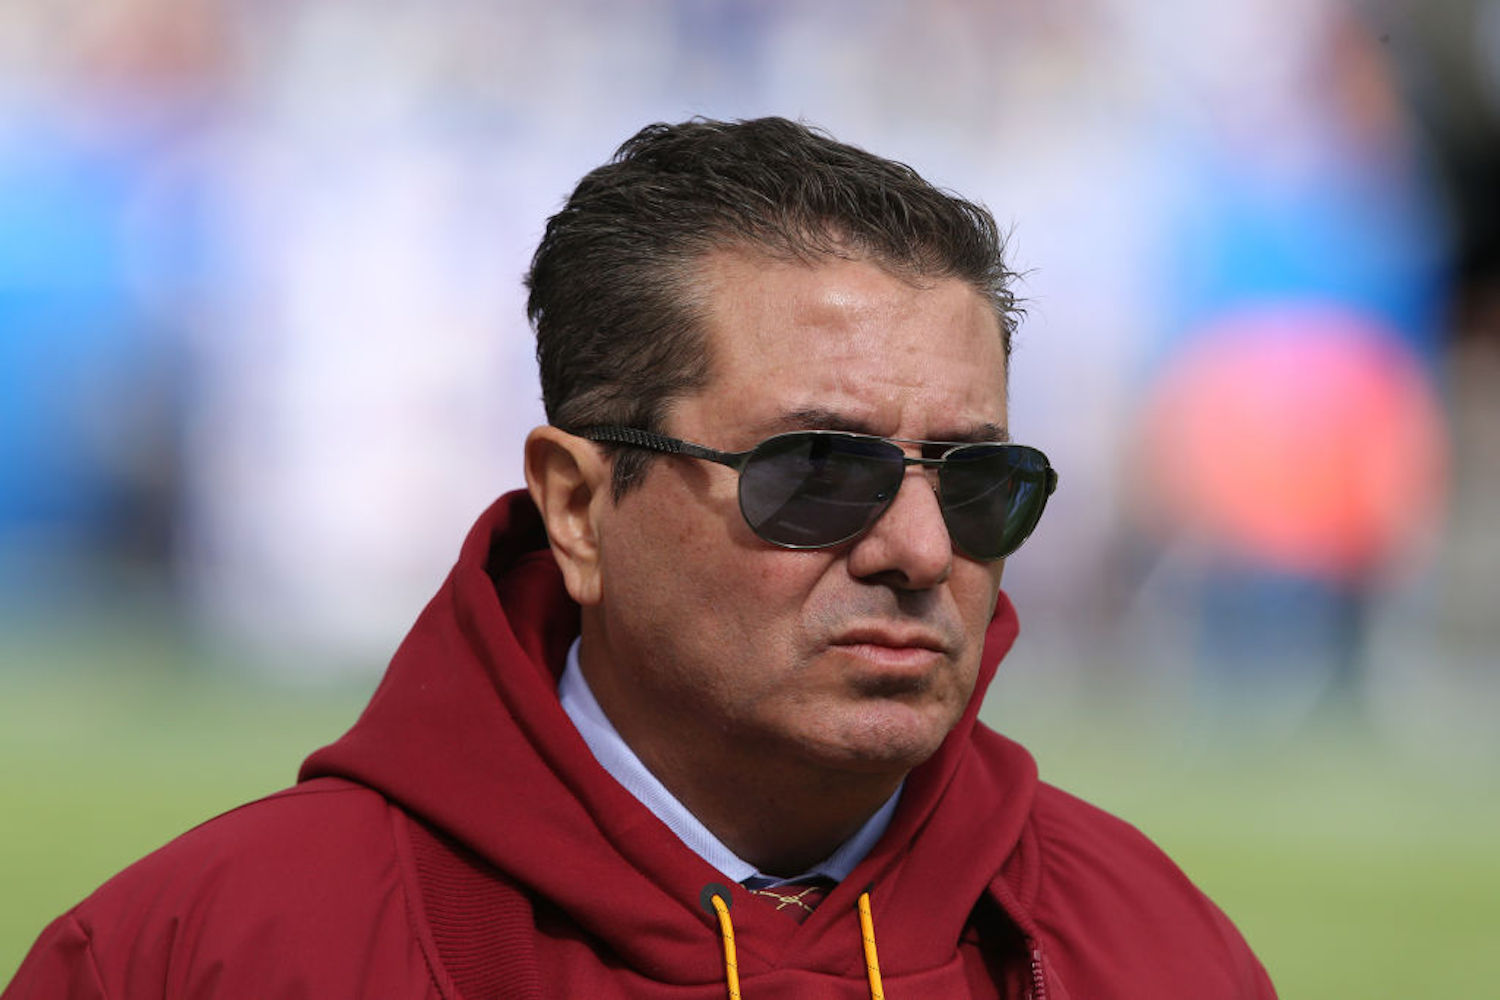 Daniel Snyder has served as the owner of the Washington Football Team for over 20 years, but he might be searching for a new job soon.